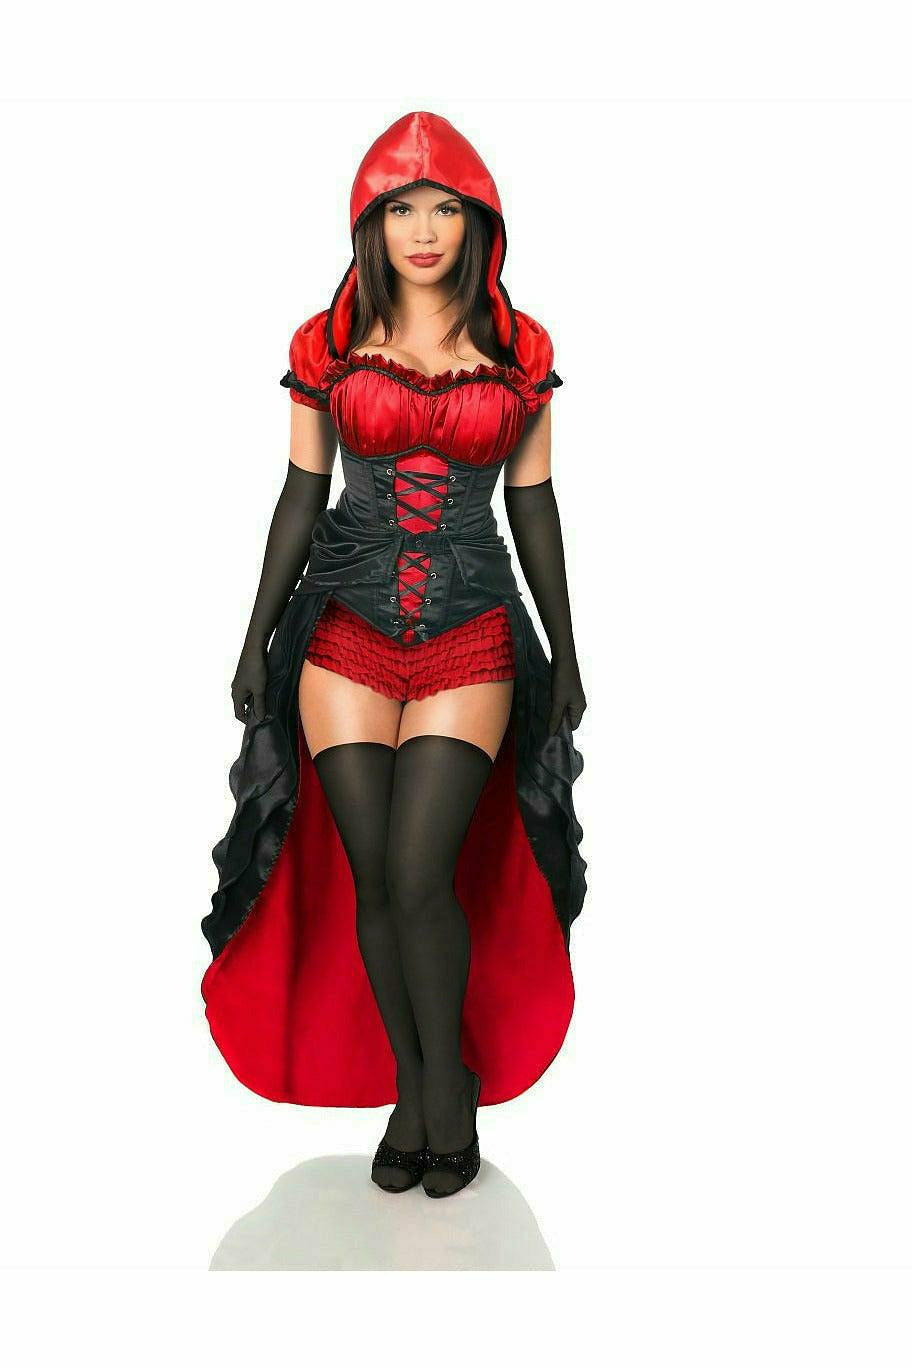 Top Drawer 5 Piece Red Hot Riding Hood Corset Costume in Size S, M, L, XL, 2X, 3X, 4X, 5X, or 6X